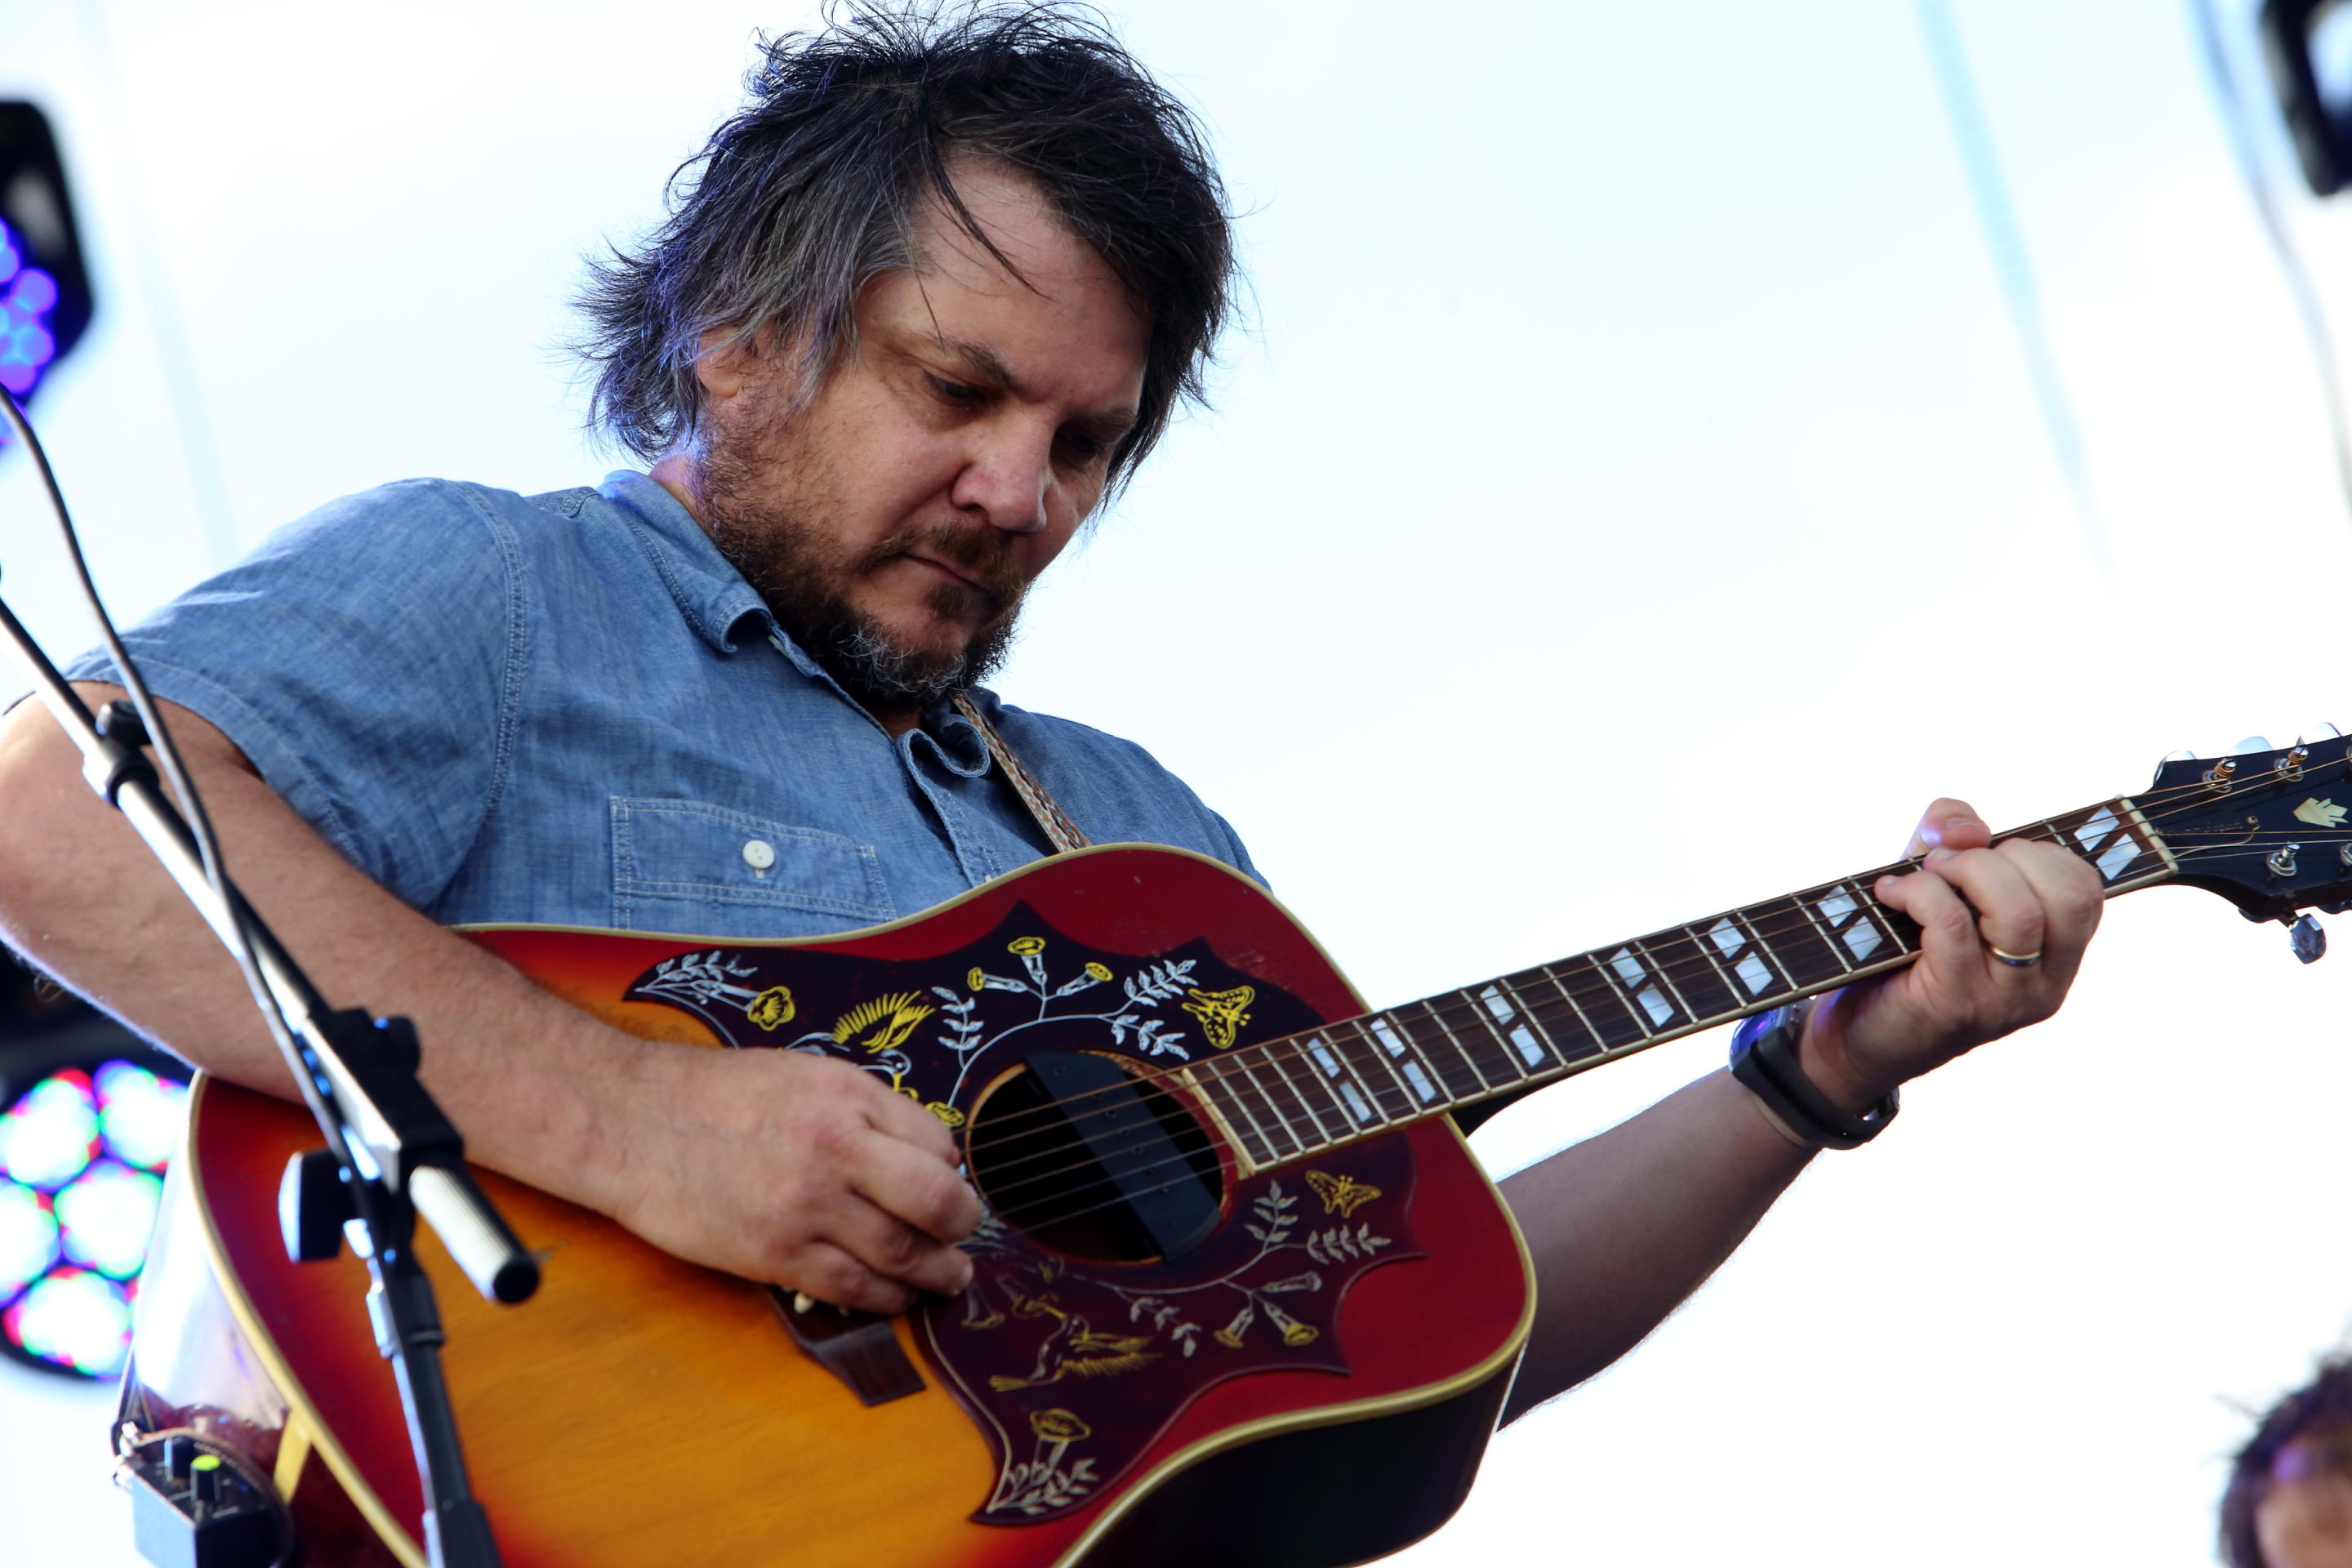 Wilco performs at the Lockn Festival in Virginia.